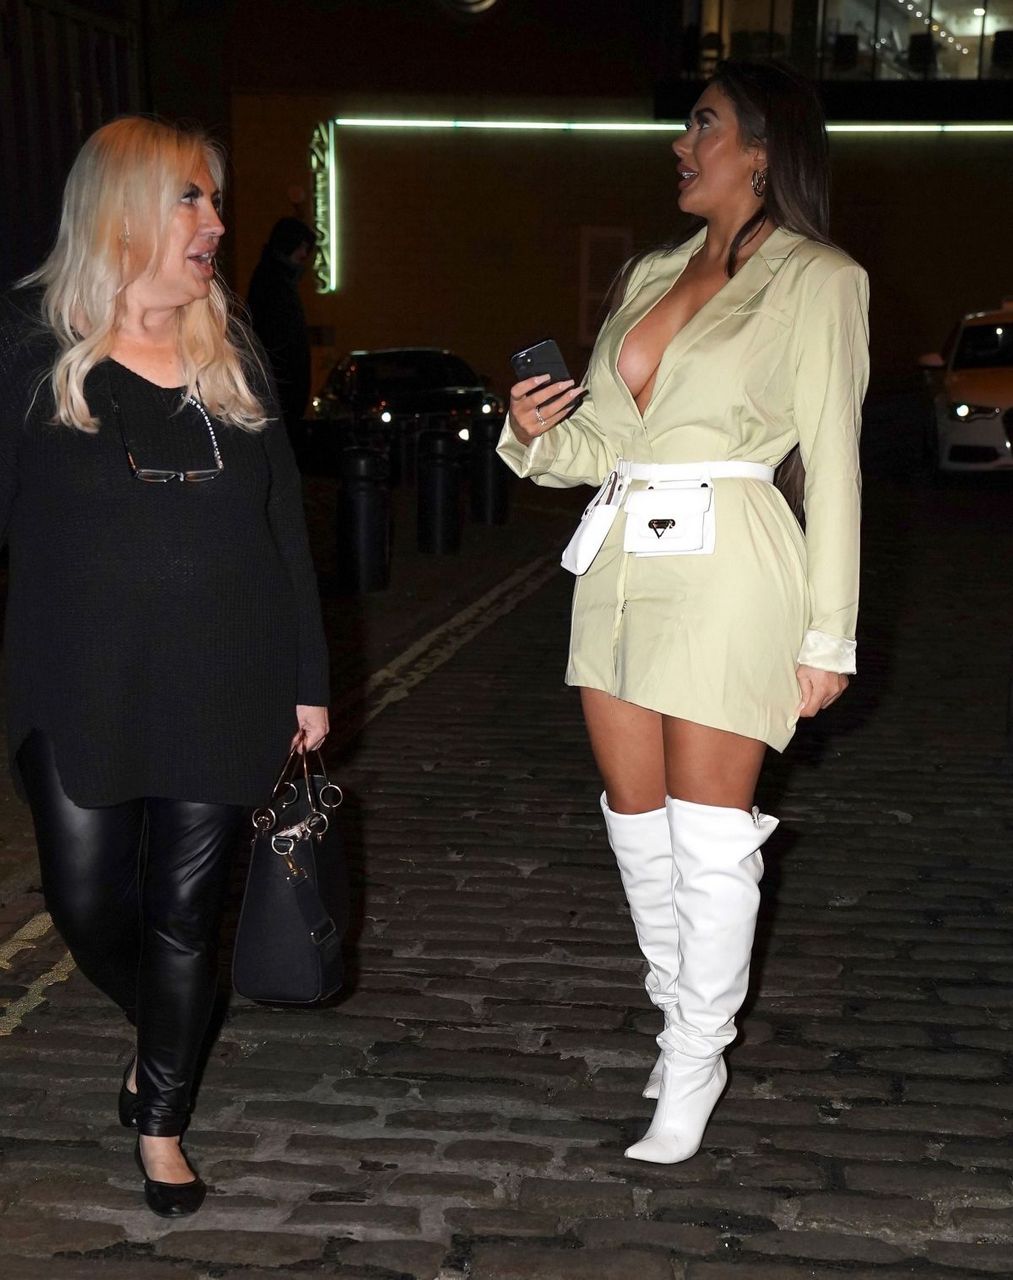 Chloe Ferry Out With Her Family For Dinner Rio Brazilian Steak House Newcastle